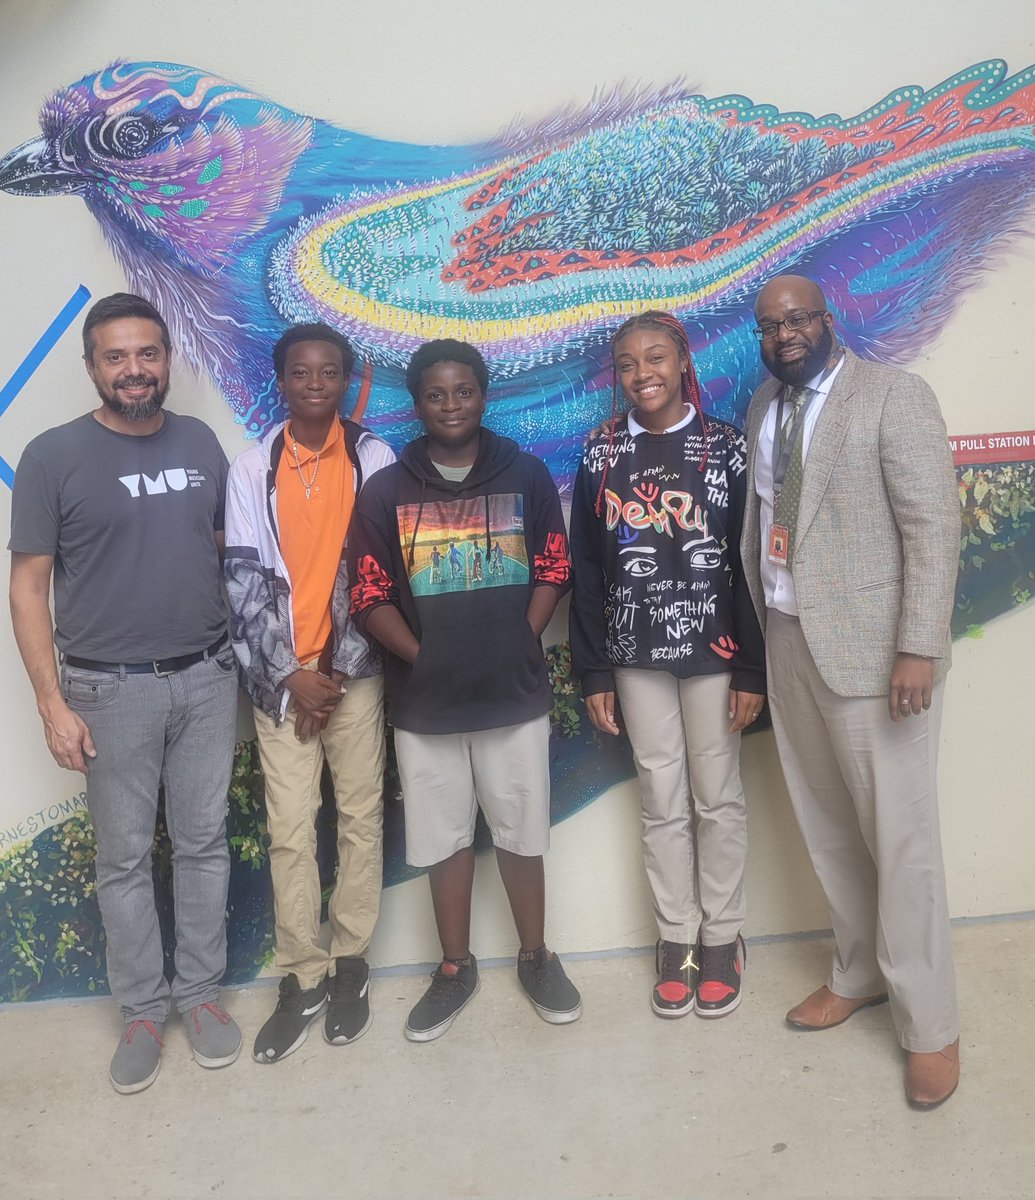 We're very pleased to announce that 3 of our students--Bruce Miley, Jahmal Pizzaro, and Beverlyn Goins have all received scholarships for the prestigious @InterlochenArts Summer Music Camp in MI. @youngmusiciansu @MDCPS @ArtEdProgMDCPS @AndyHarrison583 @RomuloEspinosa @MaloyAngel